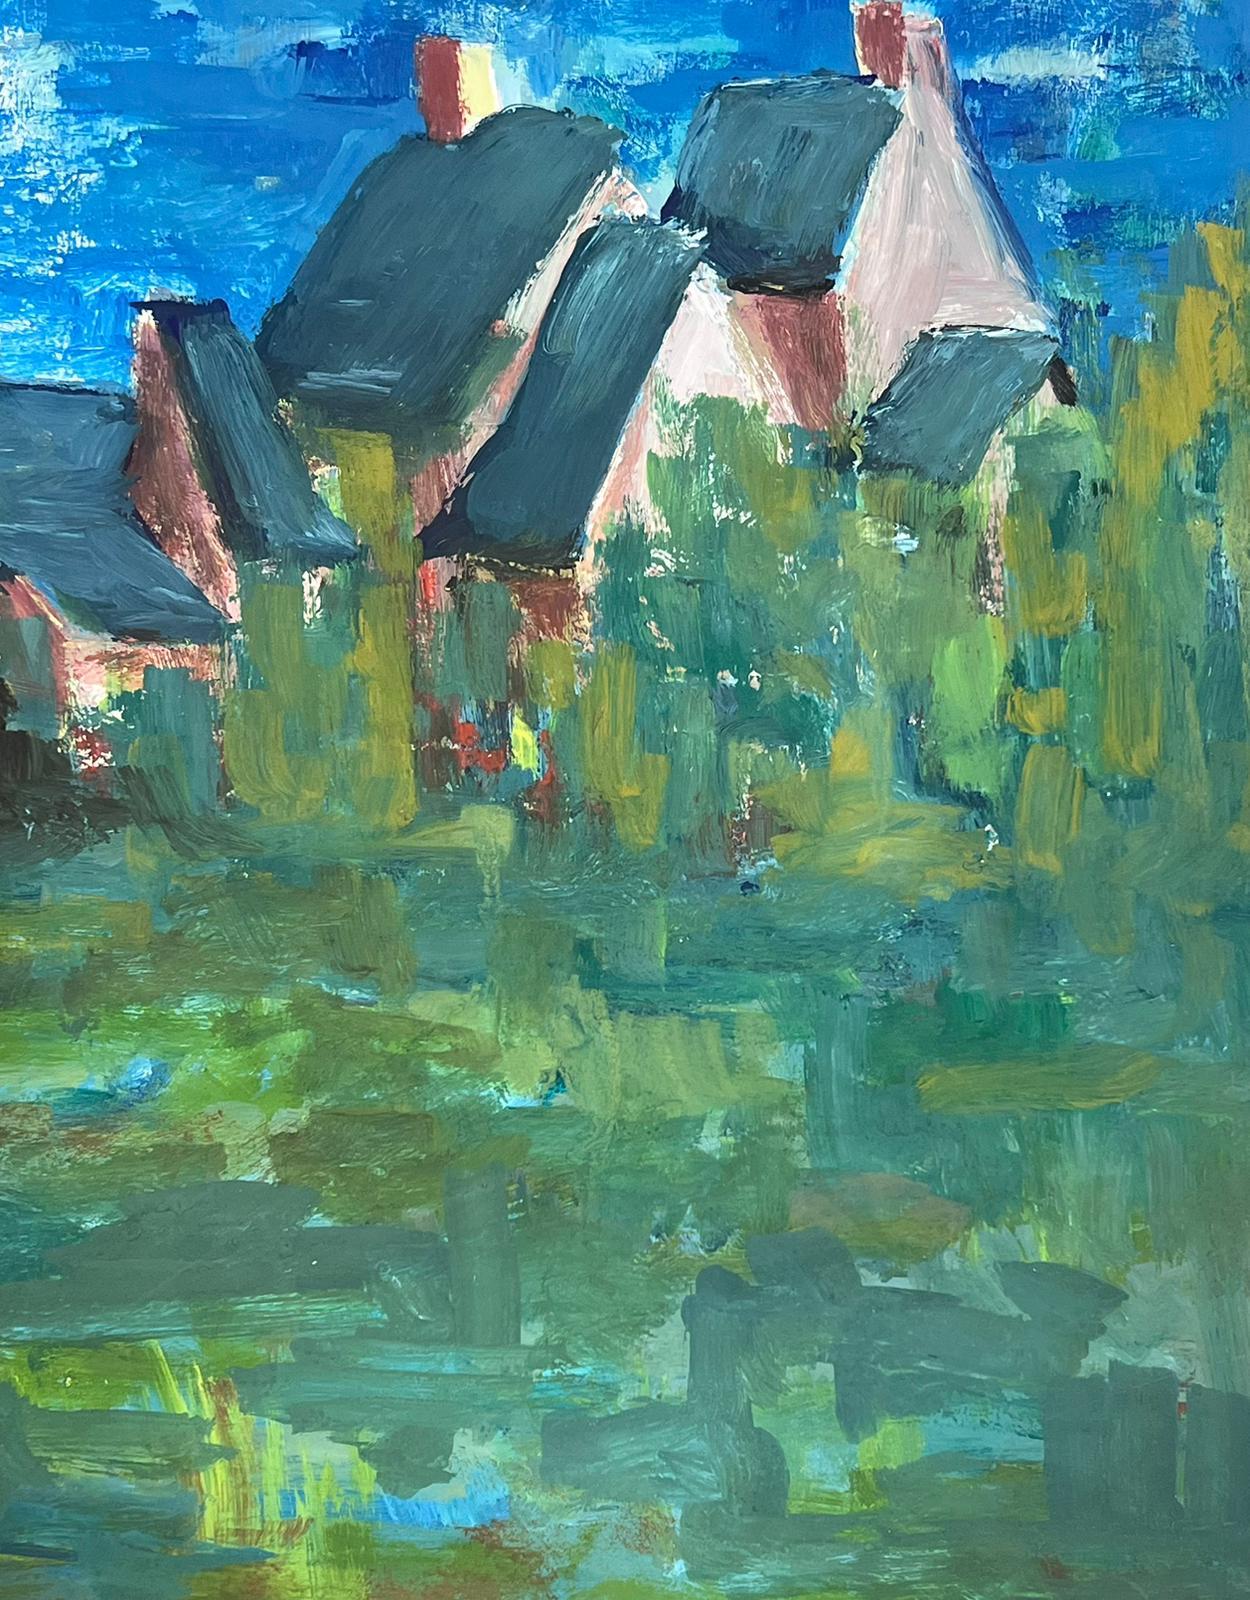 French Landscape 
by Bernard Labbe (French mid 20th century) 
original oil on artist paper
size: 12 x 9.5 inches
condition: very good and ready to be enjoyed

provenance: the artists atelier/ studio, France (stamped verso)